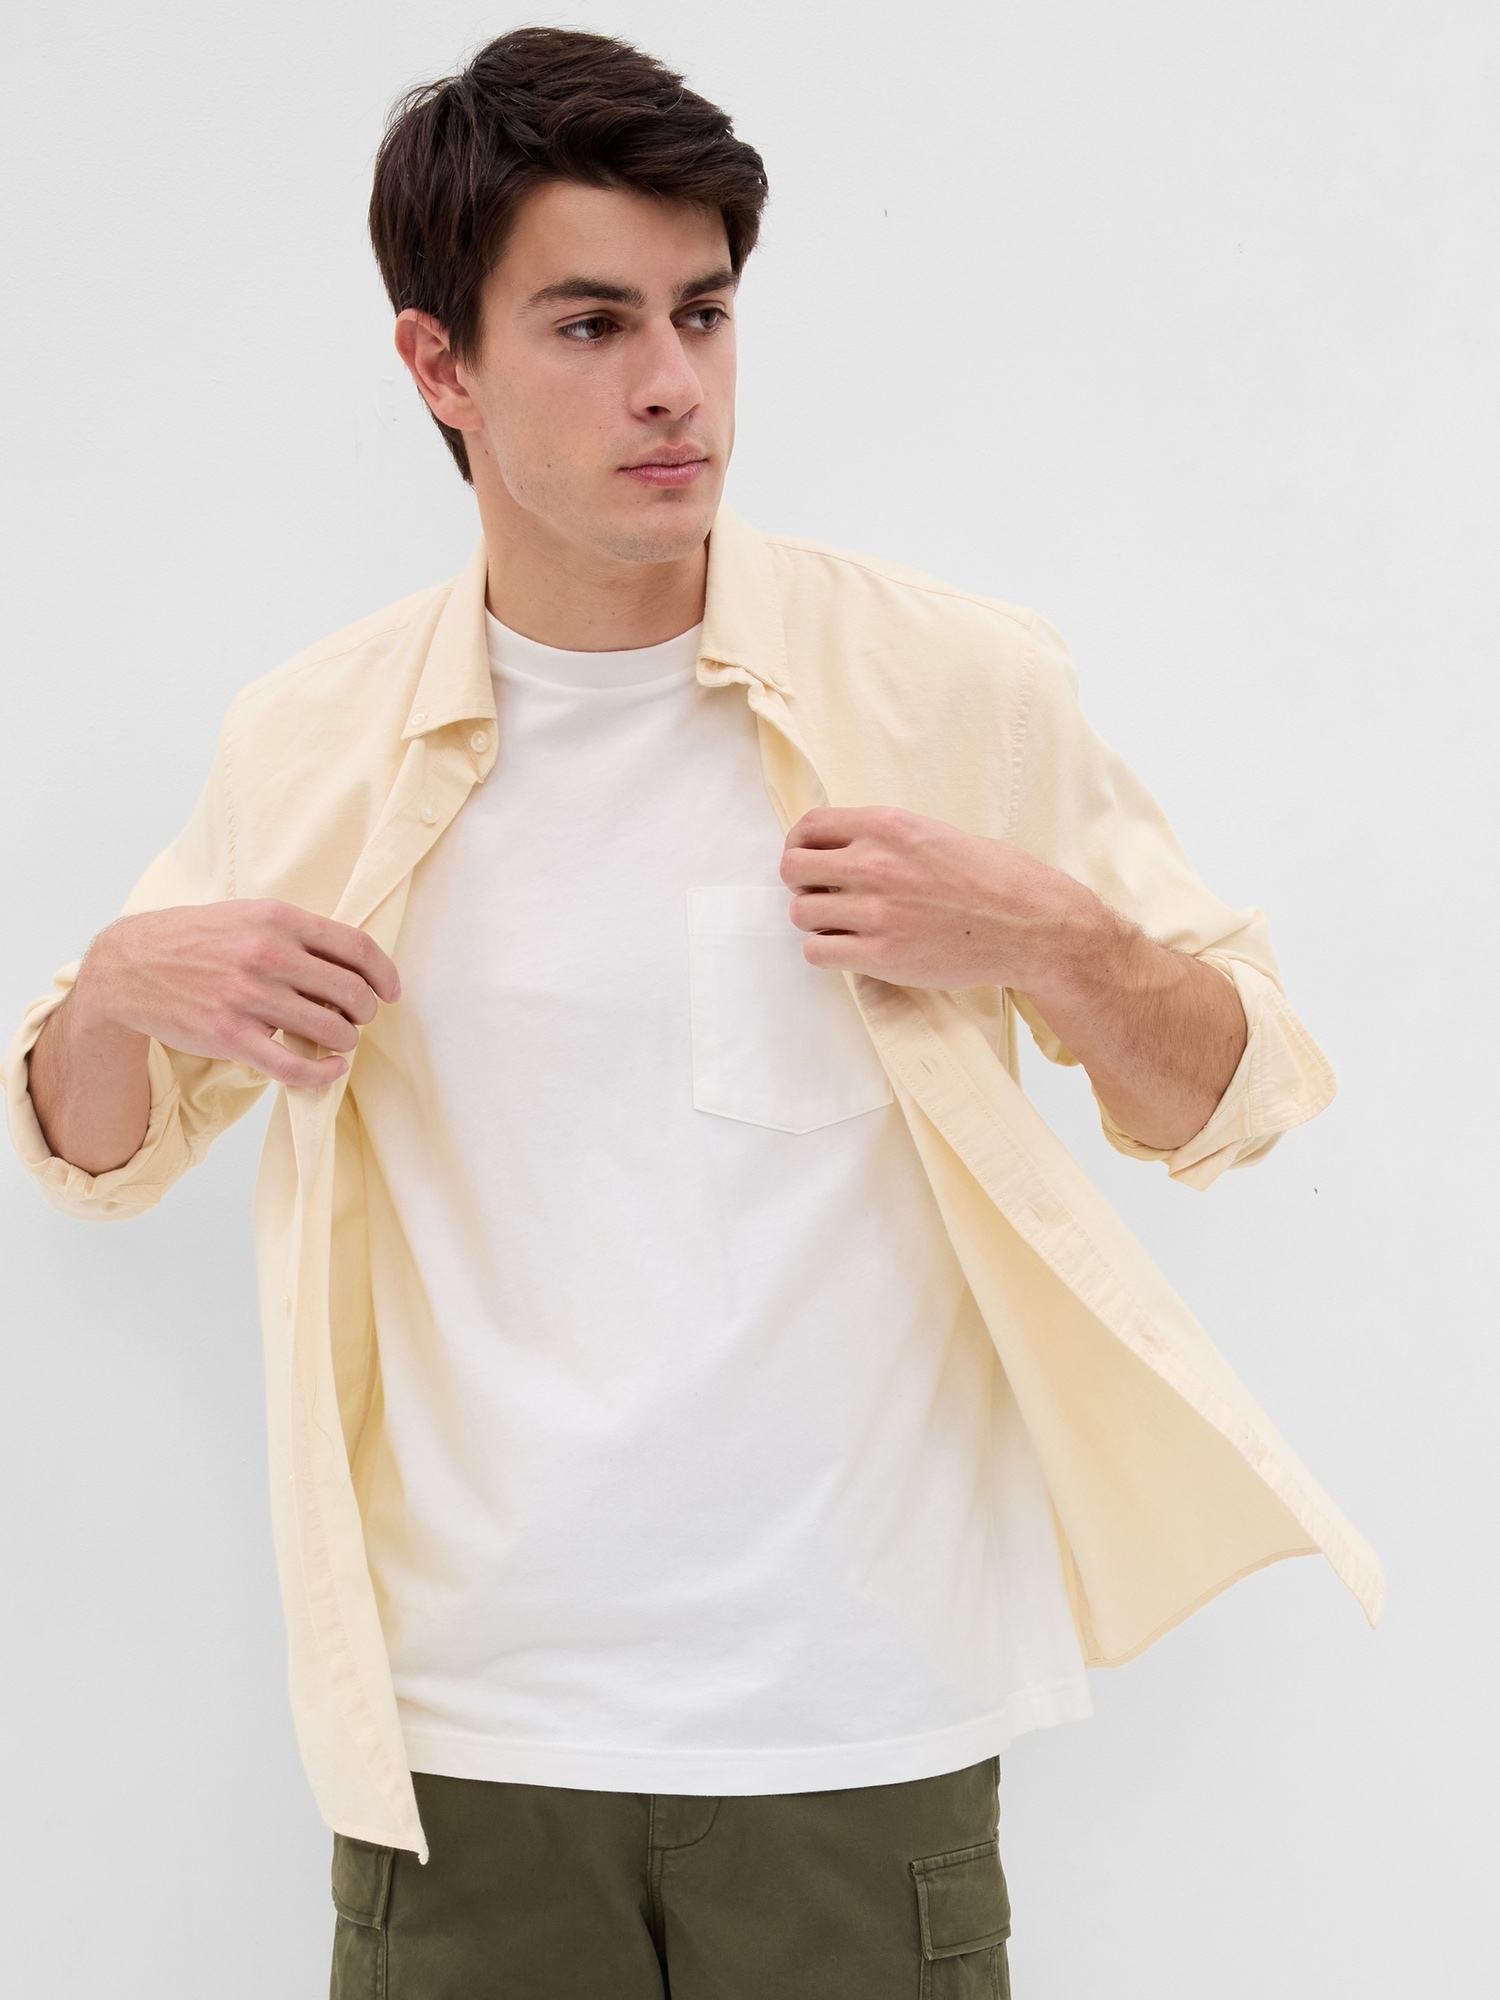 Gap Classic Oxford Shirt in Standard Fit with In-Conversion Cotton